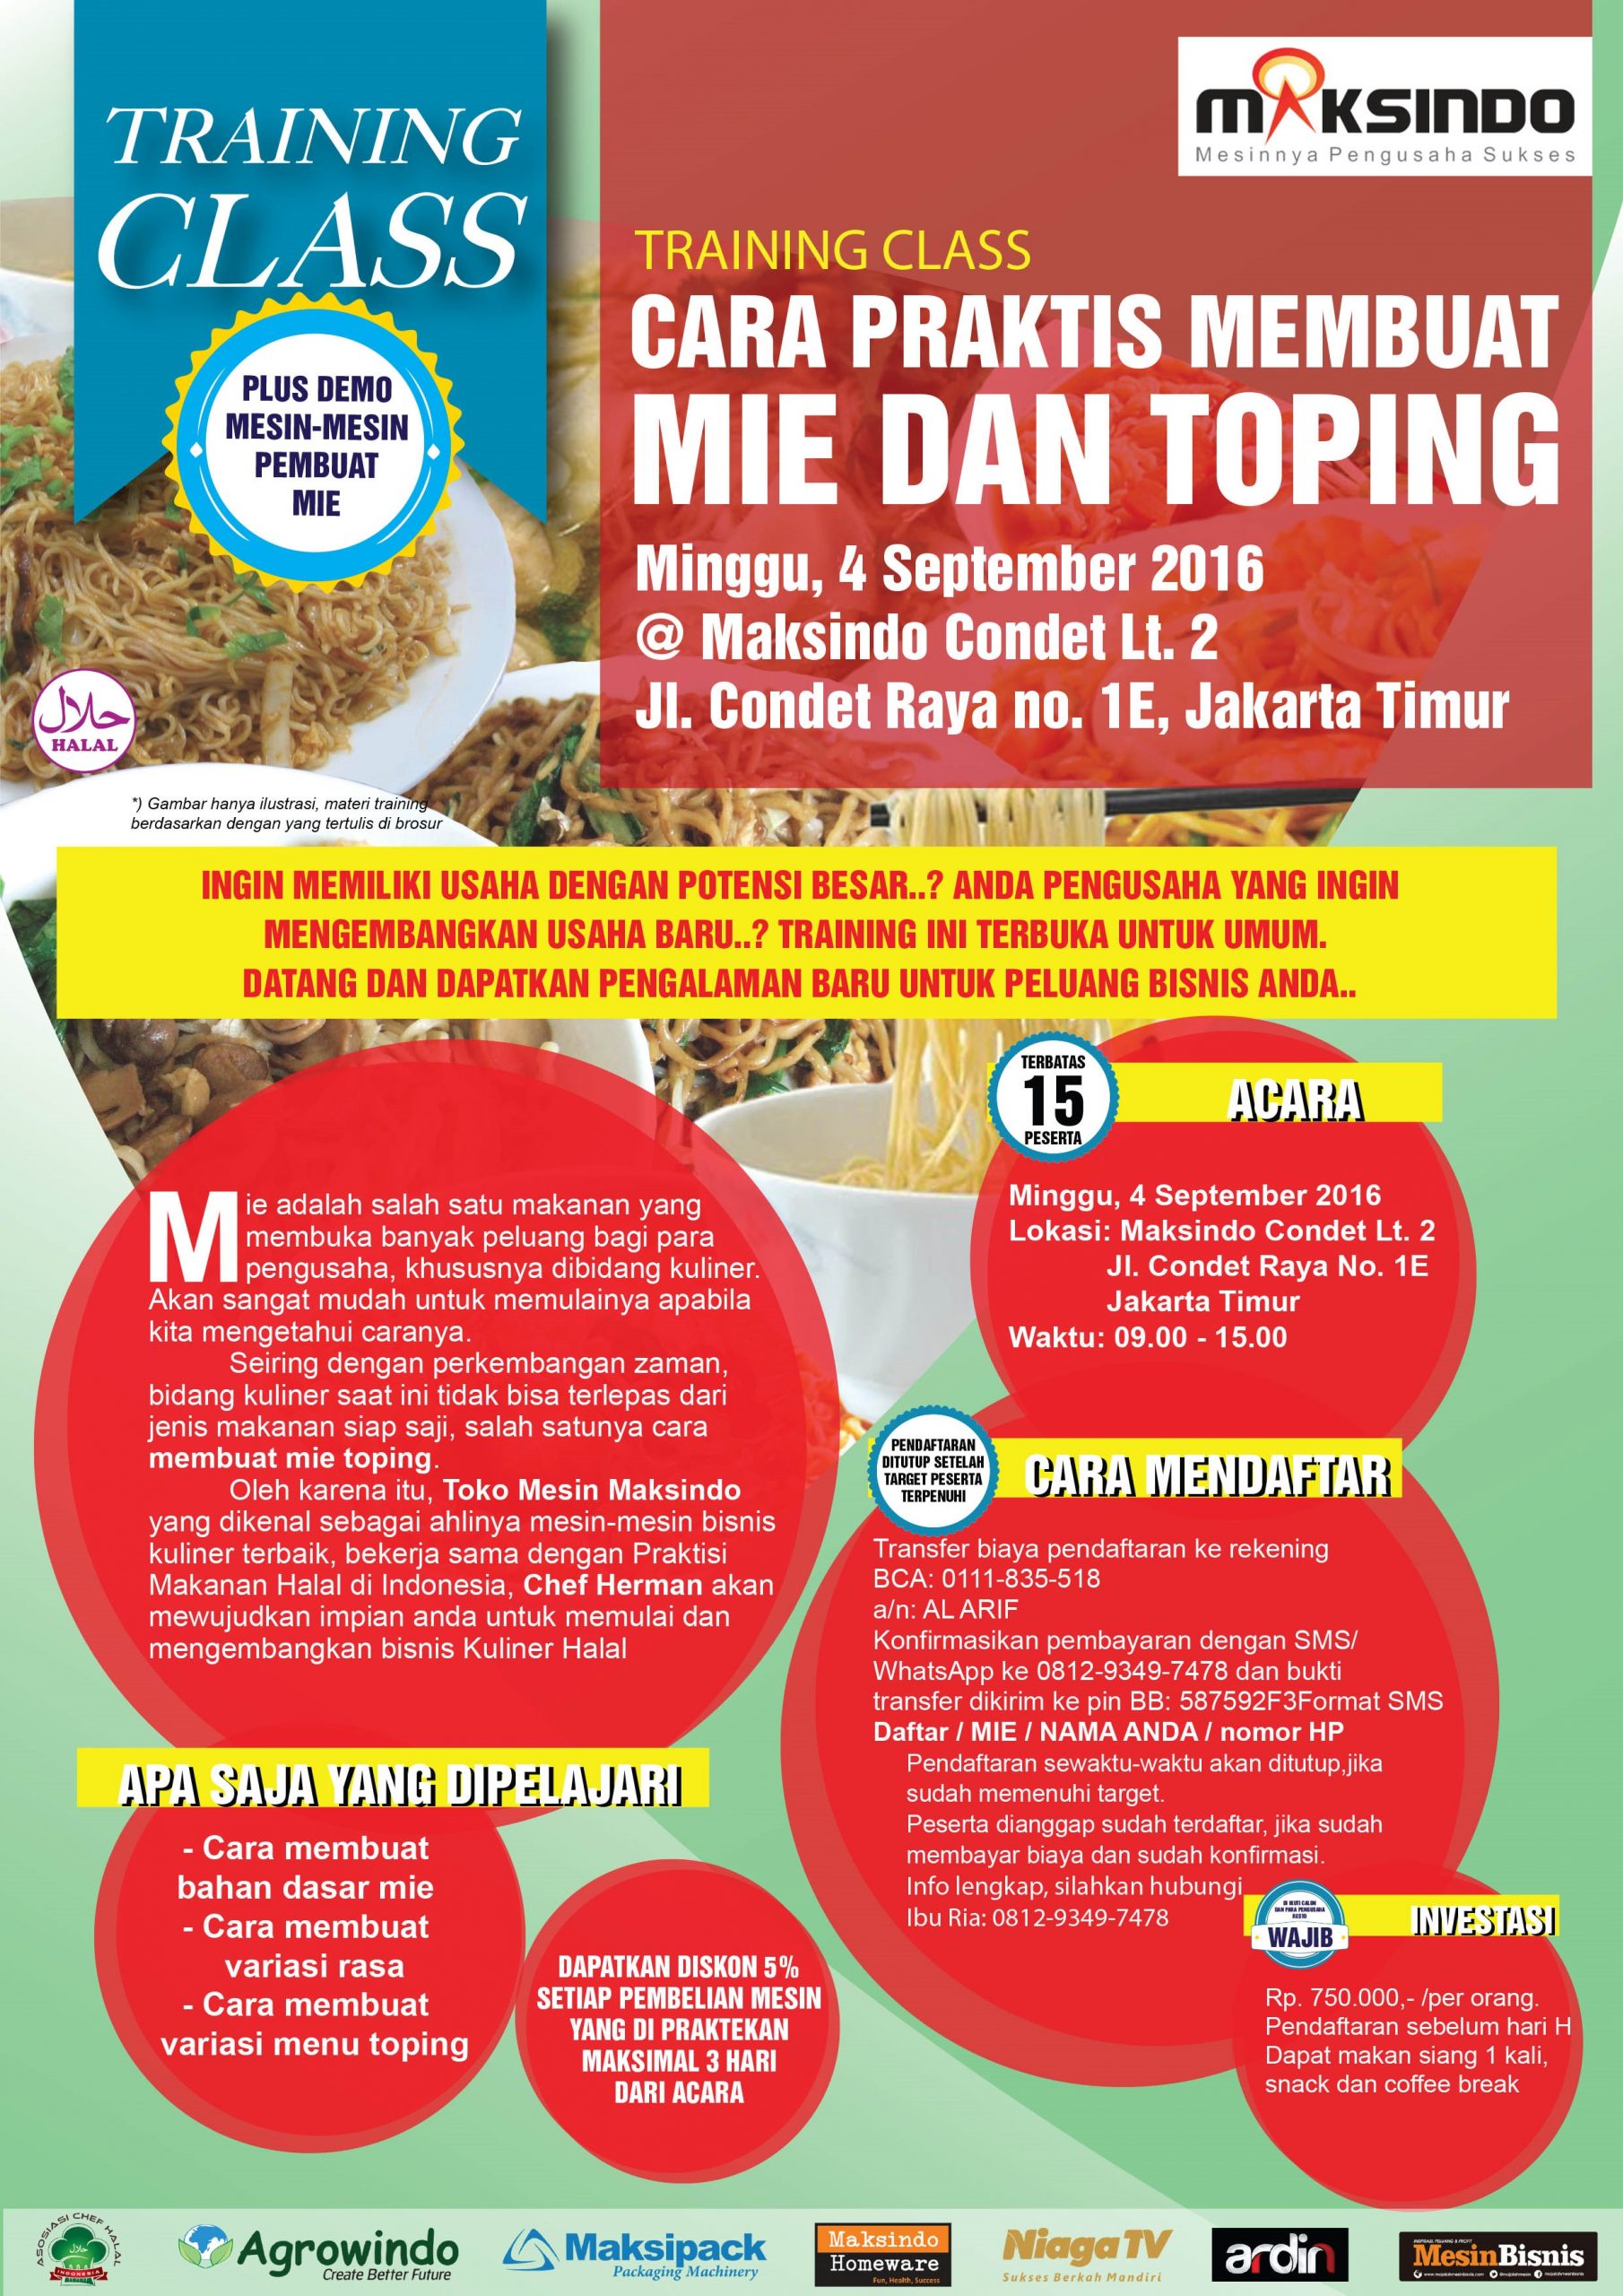 Training Mie Dan Topping di Condet, 4 September 2016